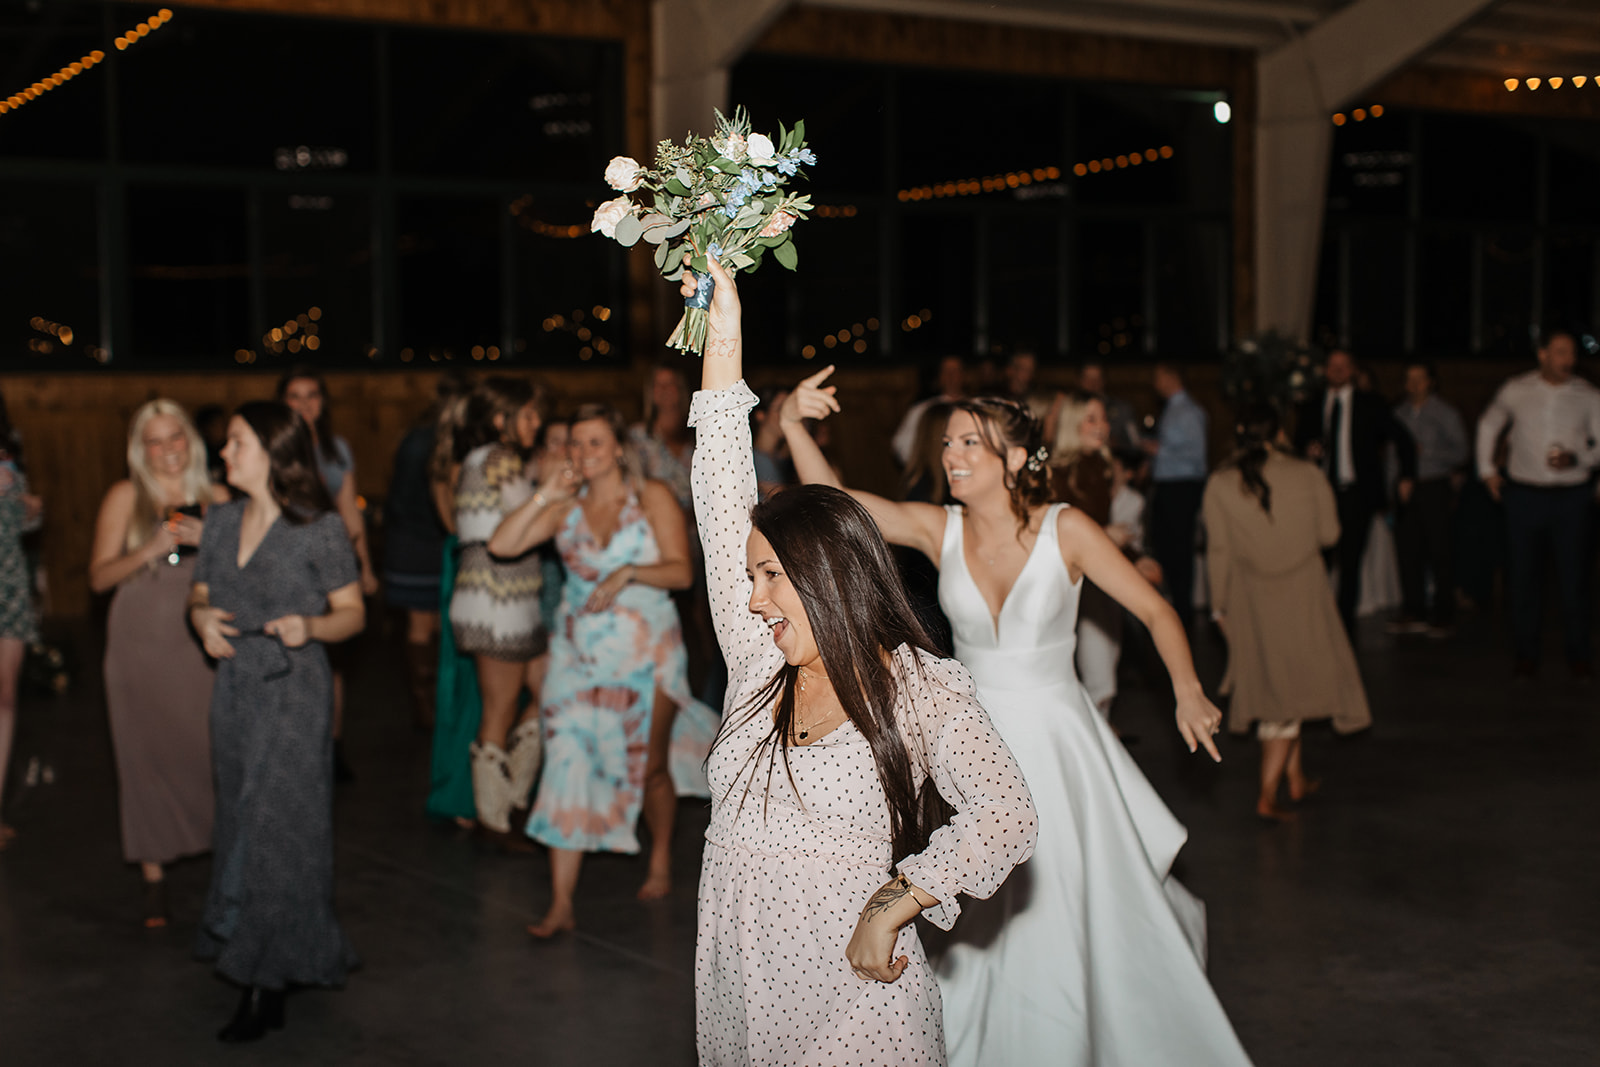 the bouquet toss at the wedding